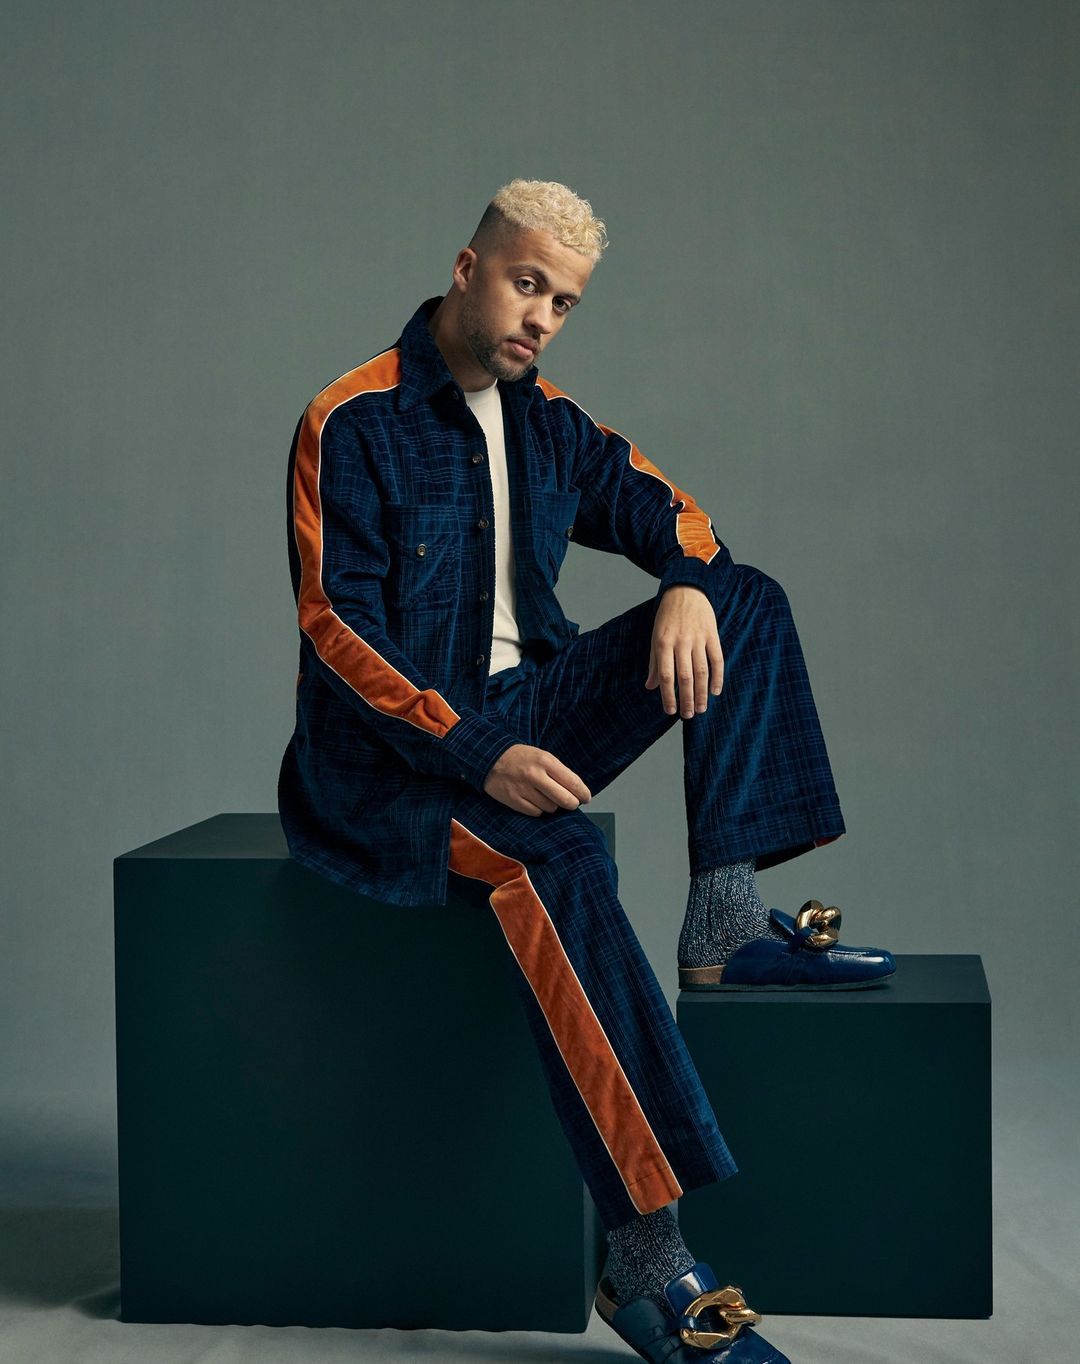 Jamal Green in the Bnaebi corduroy jacket and trousers for the 2022 BAFTA's.